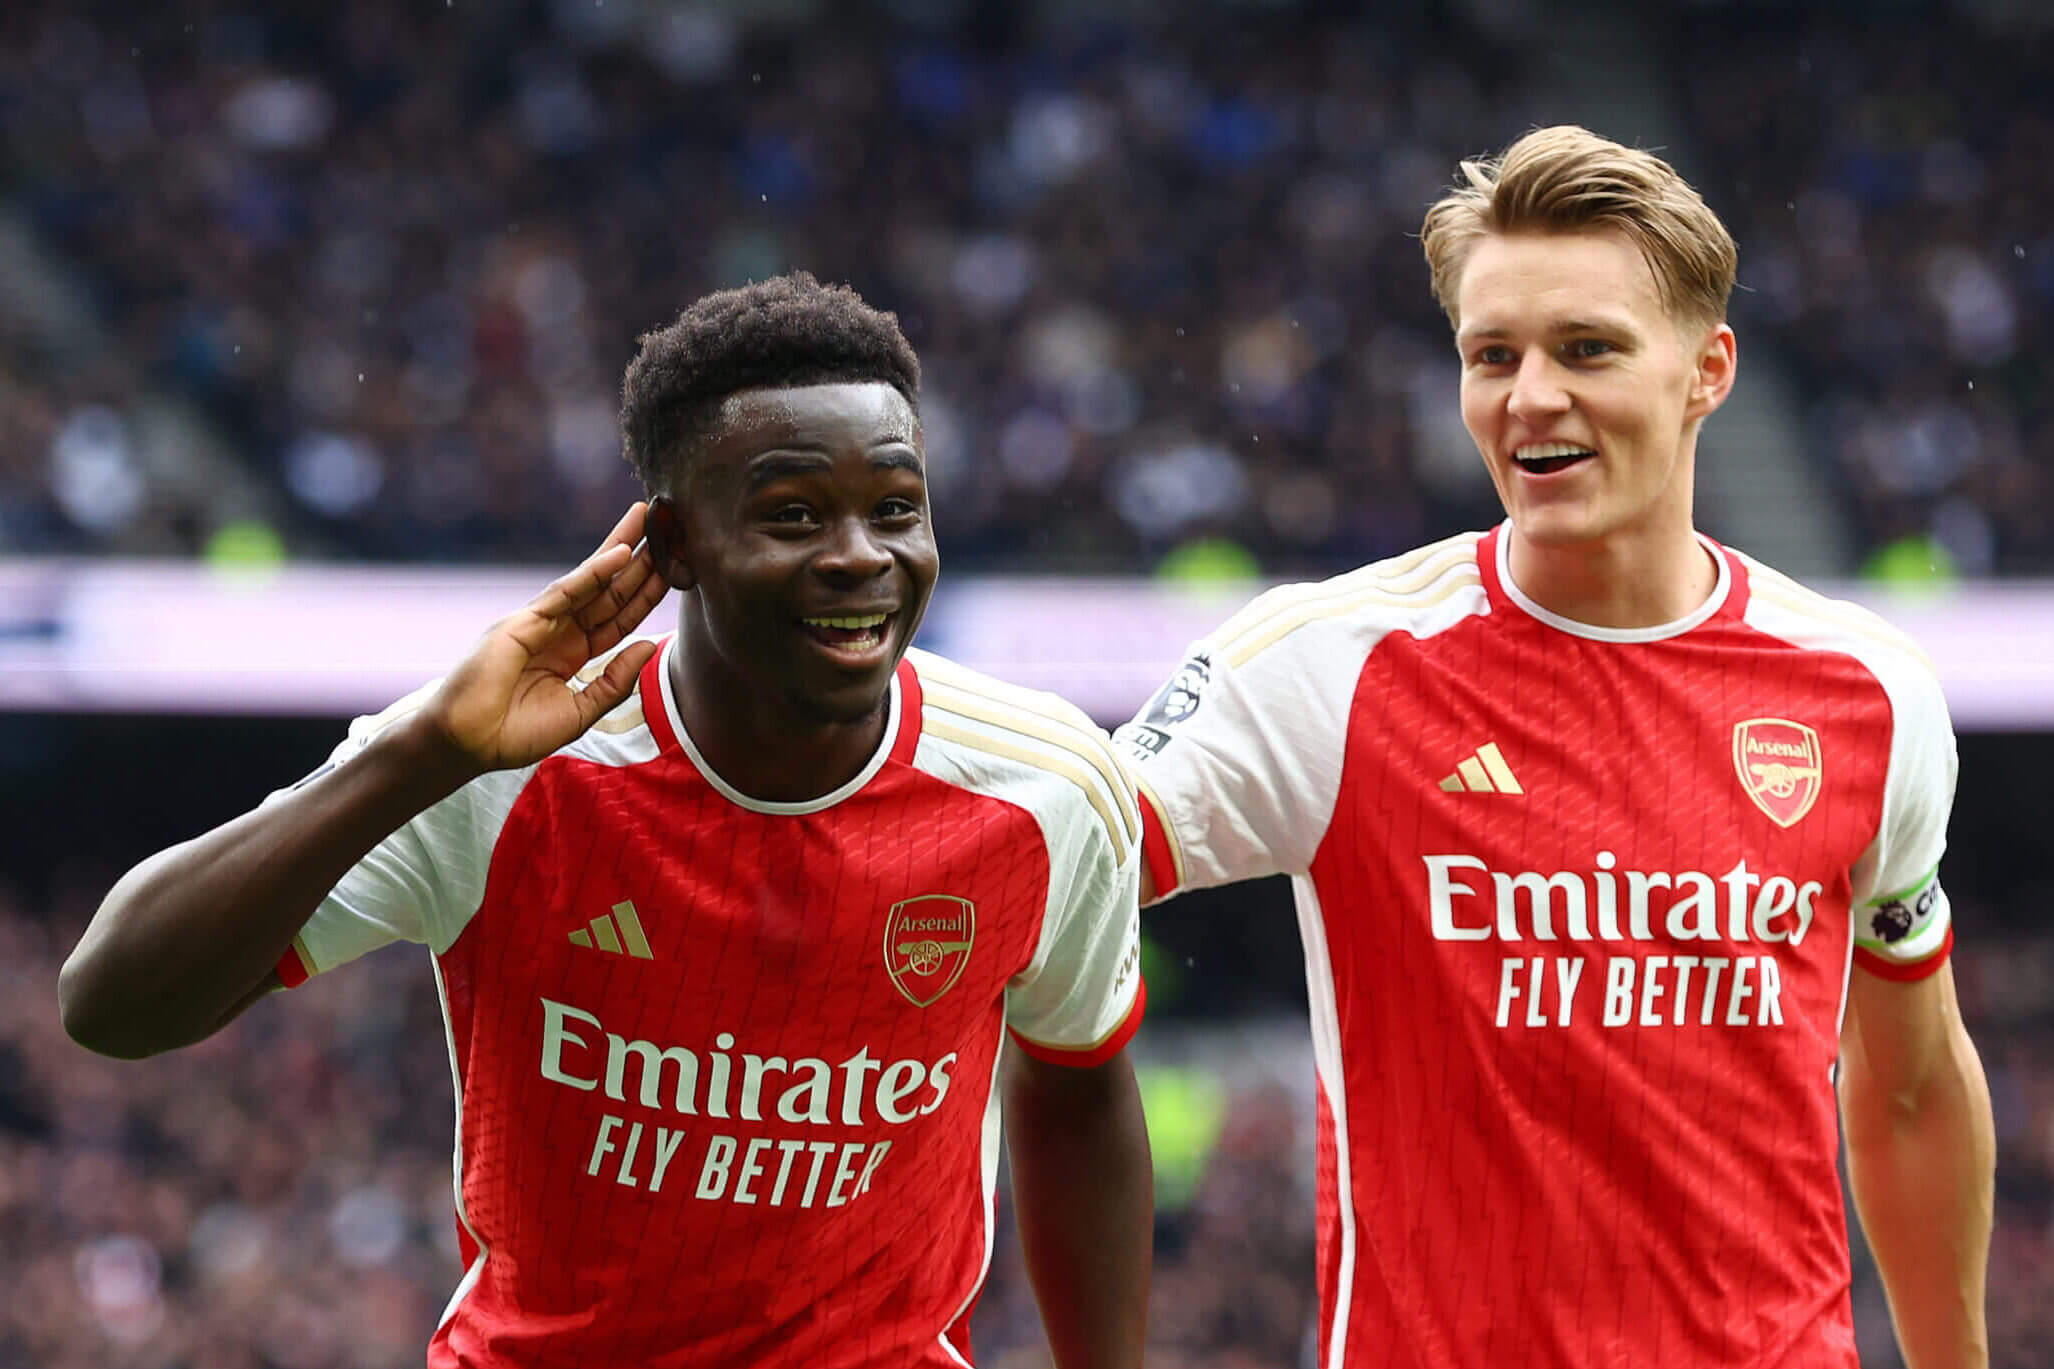 Whichever way you cut it, Arsenal are now elite - here are the numbers to prove it